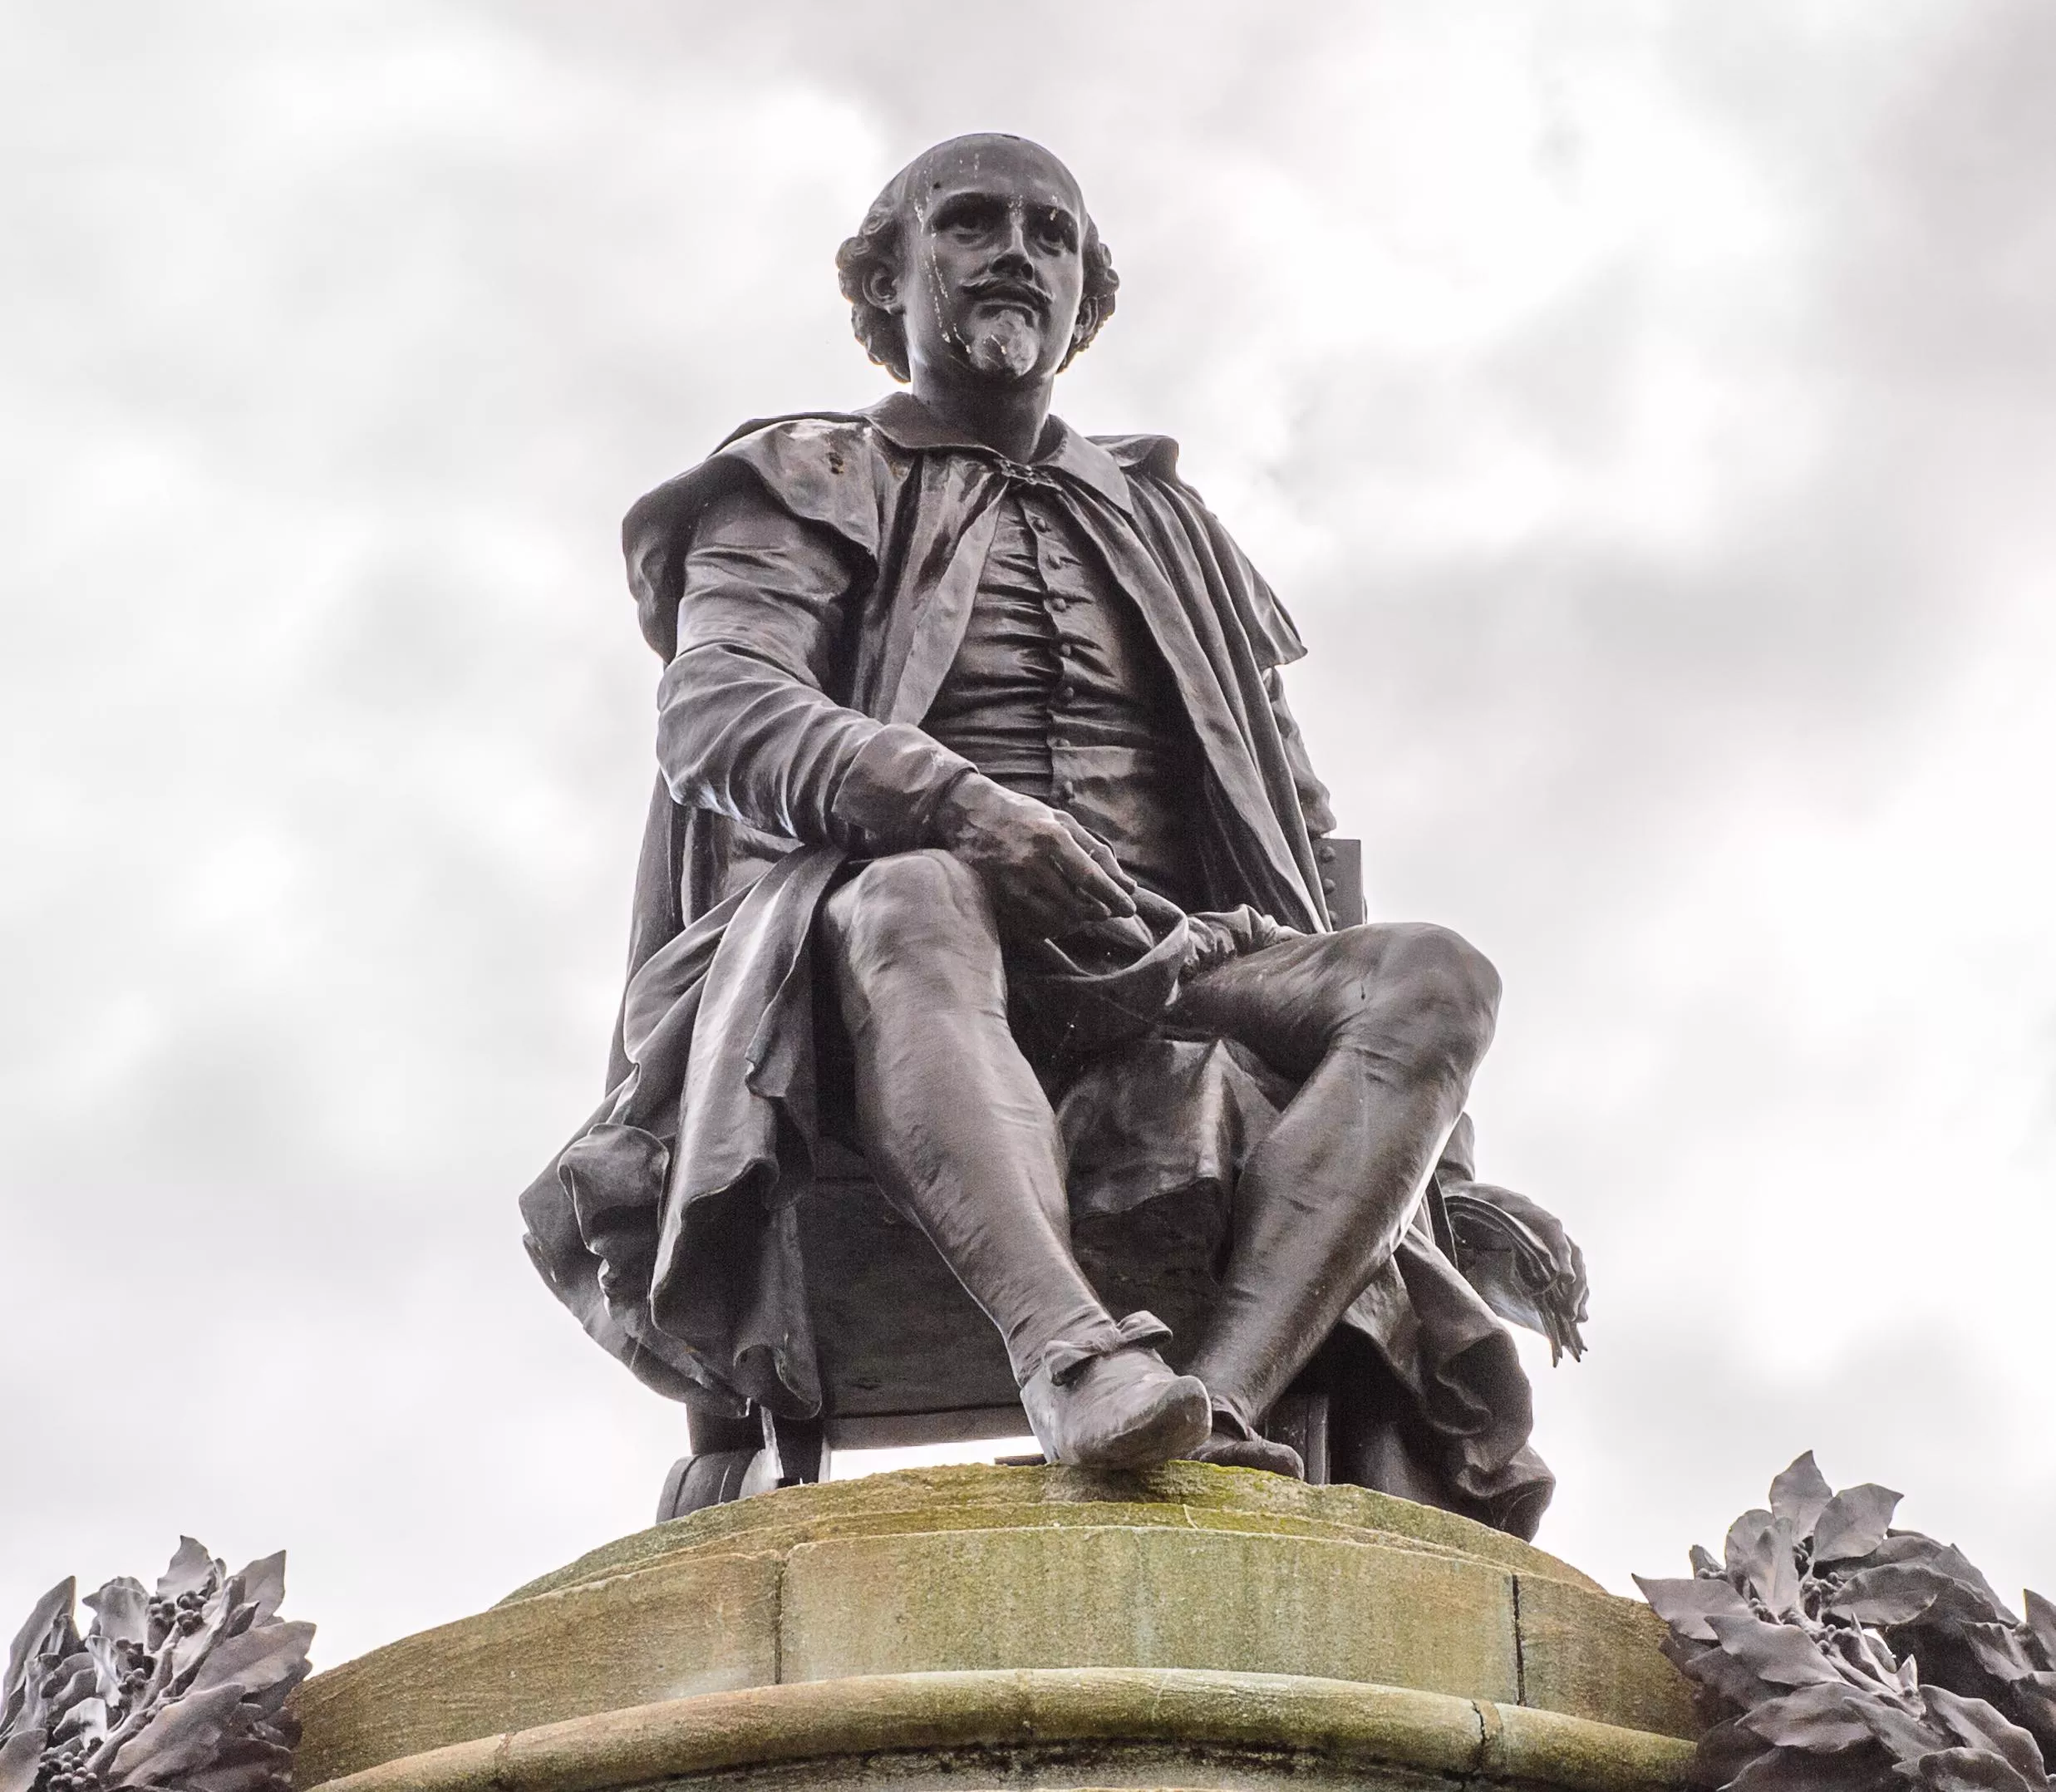 The photo shows William Shakespeare statue in Stratford Upon Avon